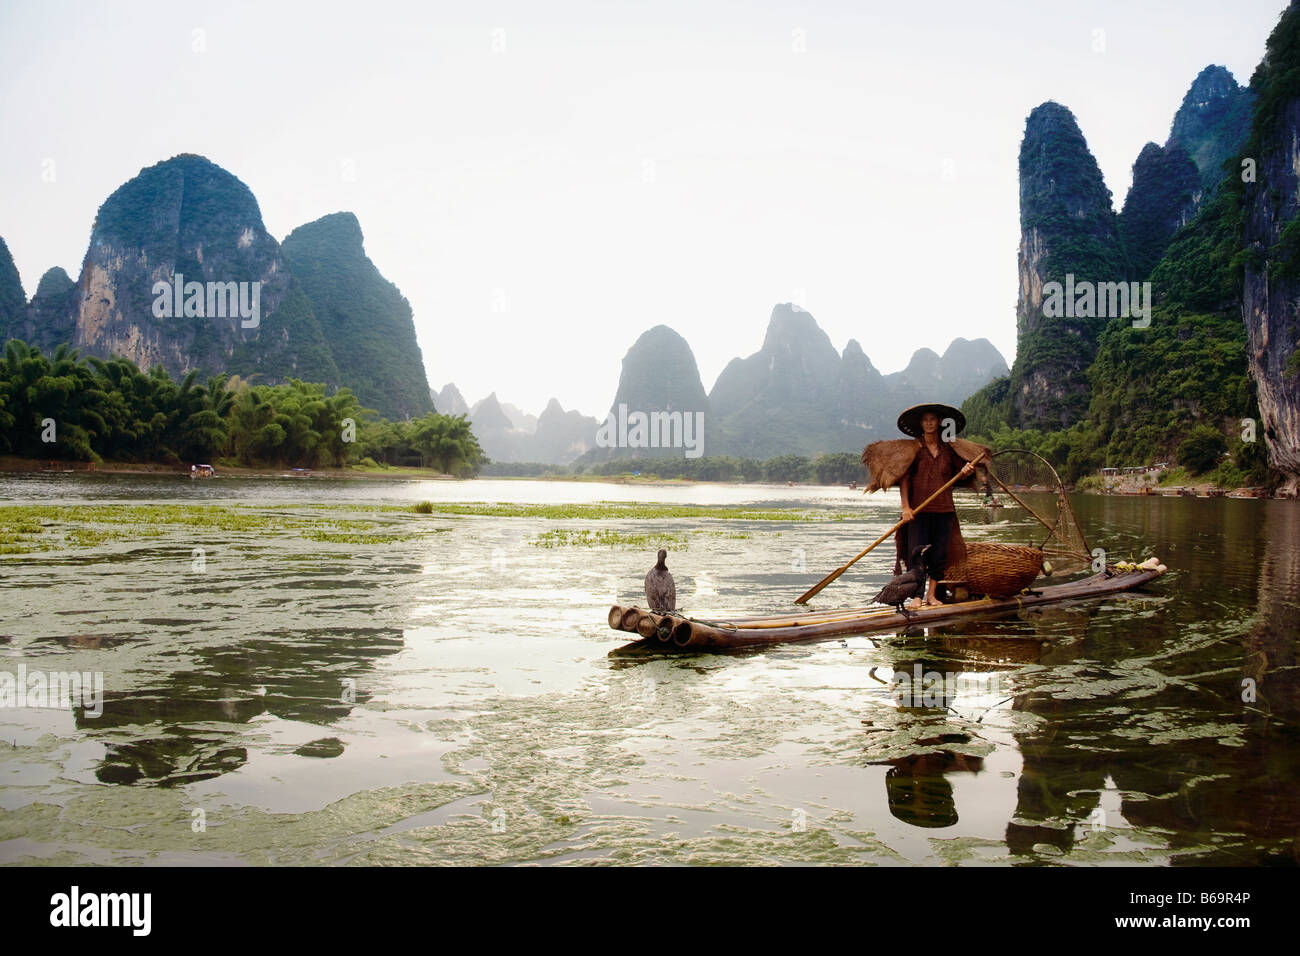 Fisherman on a bamboo raft with a hill range in the background, Guilin Hills, XingPing, Yangshuo, Guangxi Province, China Stock Photo